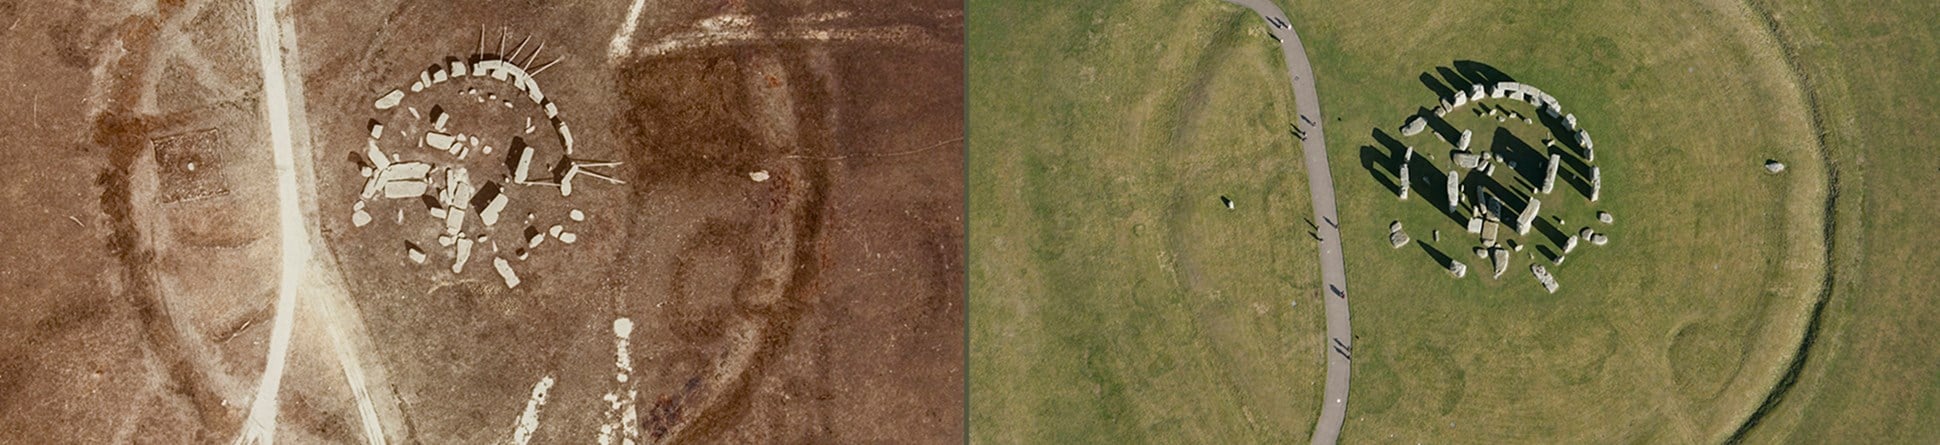 Two aerial images of Stonehenge taken in 1906 and 2006.